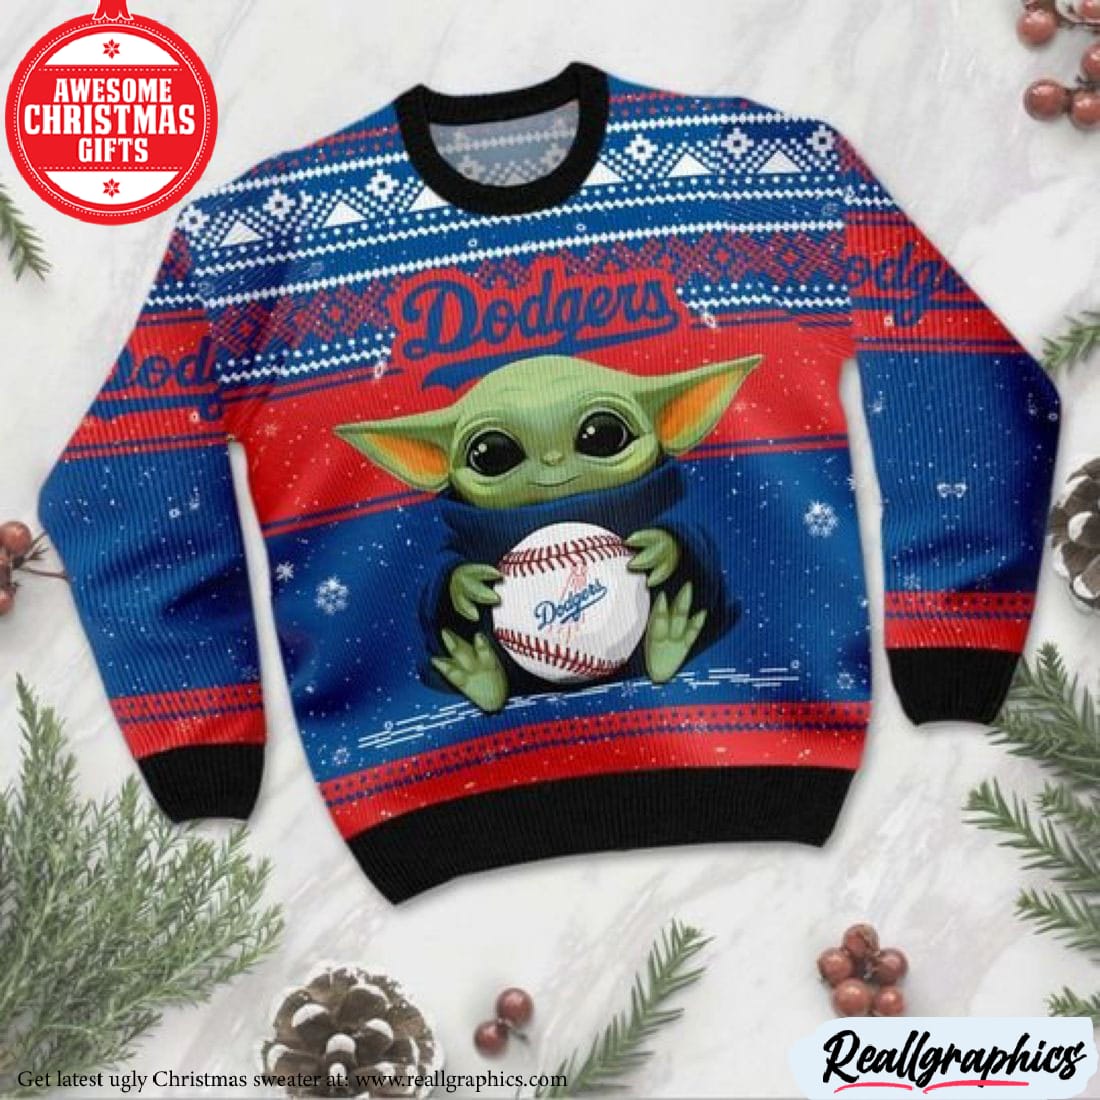 dodgers ugly sweater